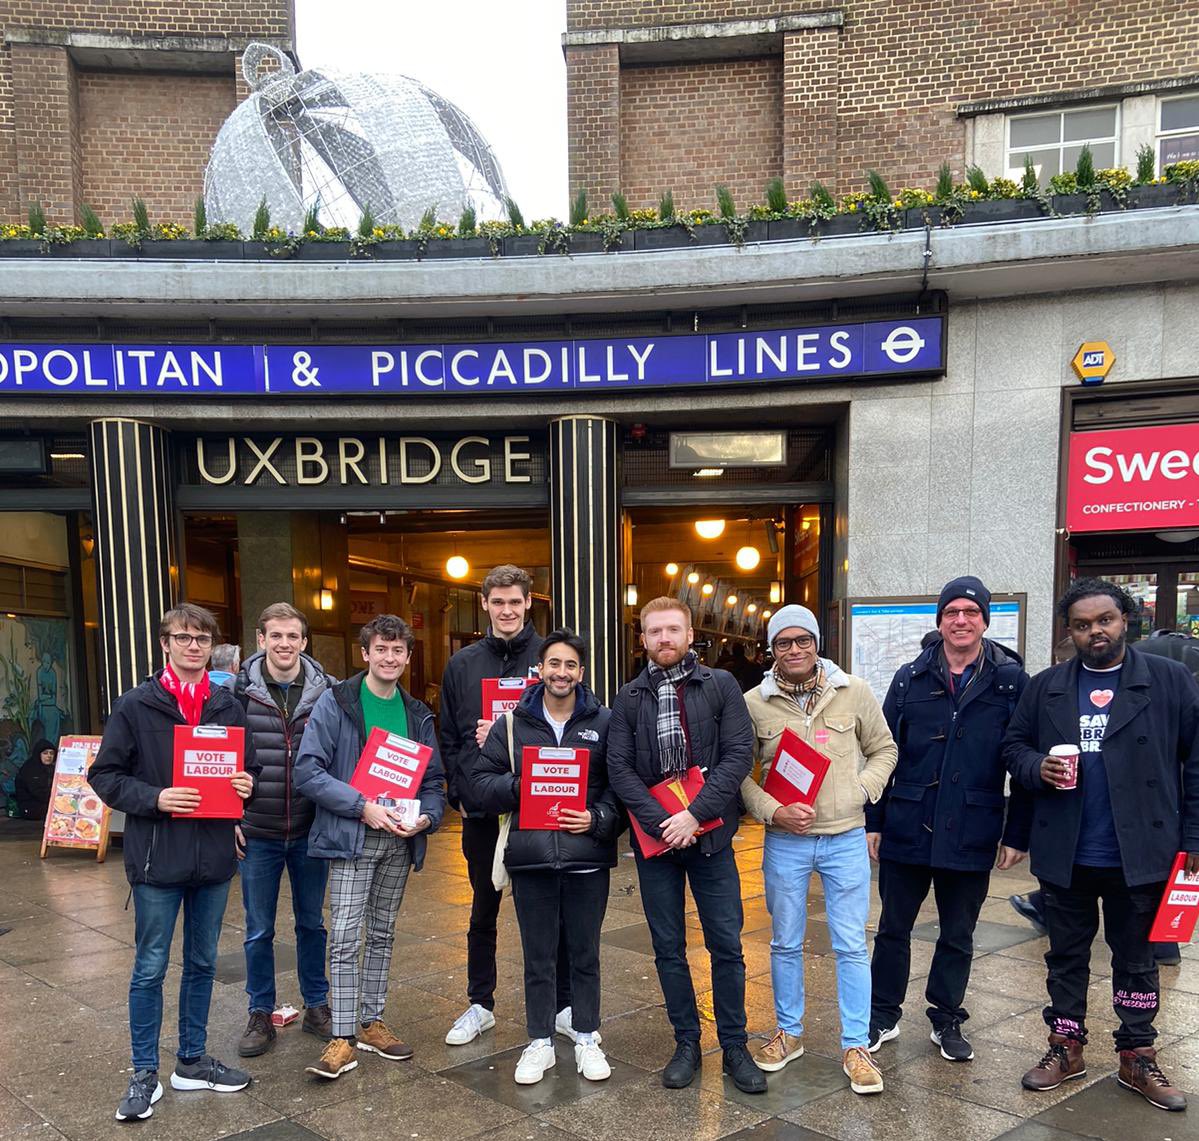 Lovely to be back in Uxbridge with @LGBTLabourLDN today 🌹🏳️‍🌈 Residents angered at Tory plans to shut Uxbridge library - a move the new Conservative MP voted for. By contrast, a lot of love for @DannyBeales on the doorstep!